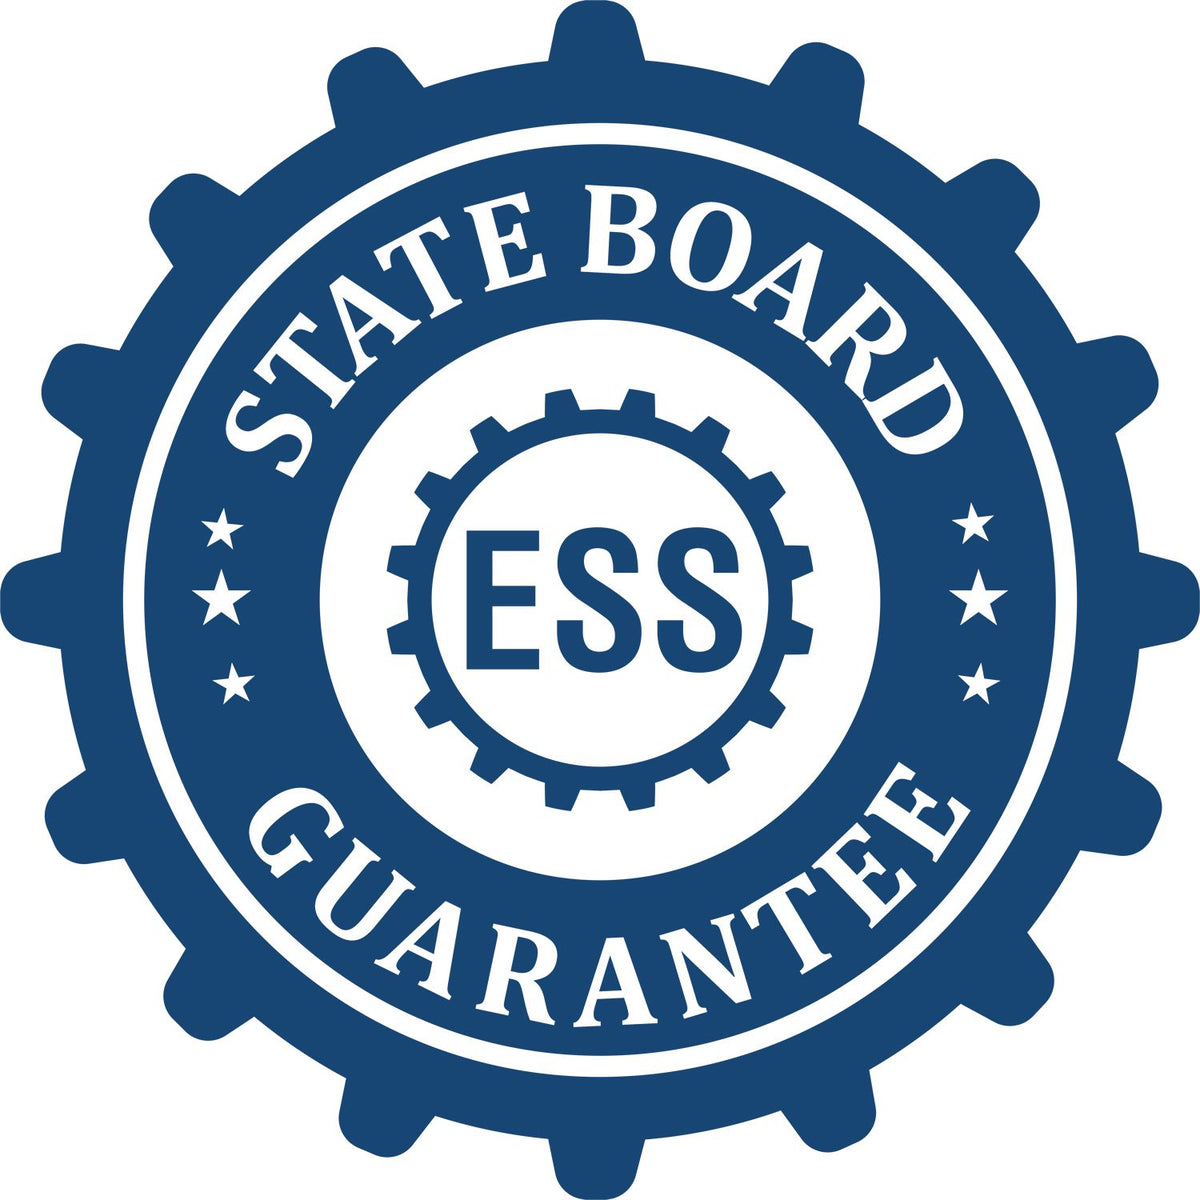 An emblem in a gear shape illustrating a state board guarantee for the Premium MaxLight Pre-Inked New York Landscape Architectural Stamp product.